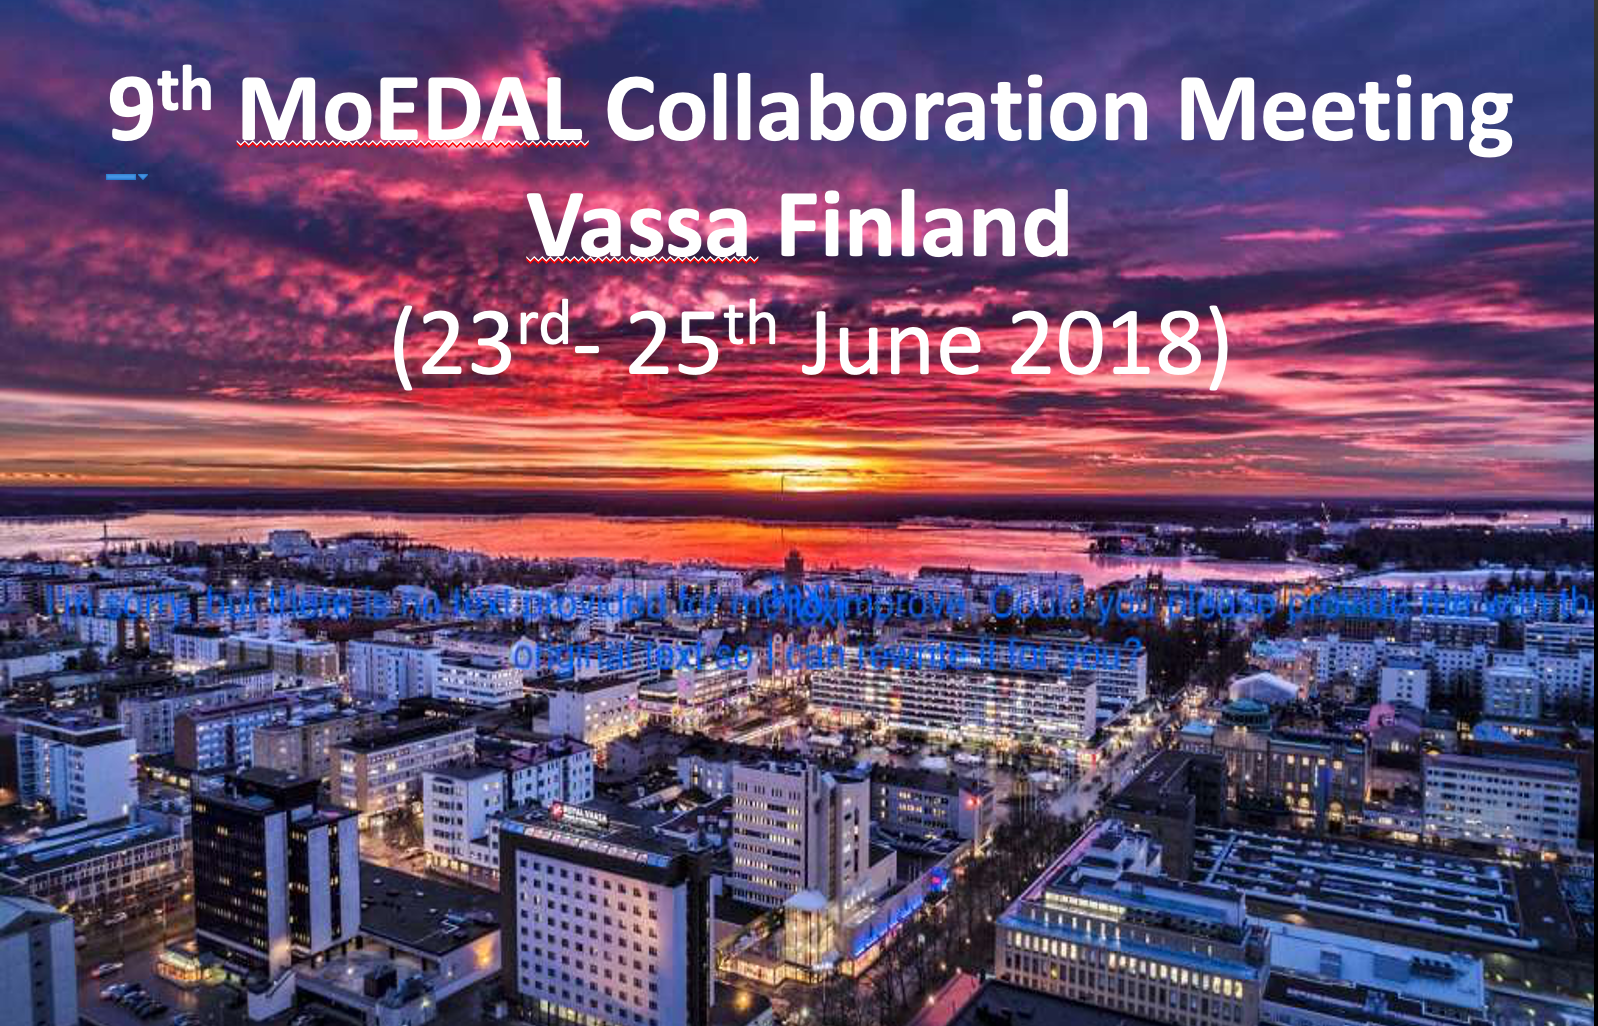 MoEDAL's 9th Collaboration Meeting in Vassa, Finland.